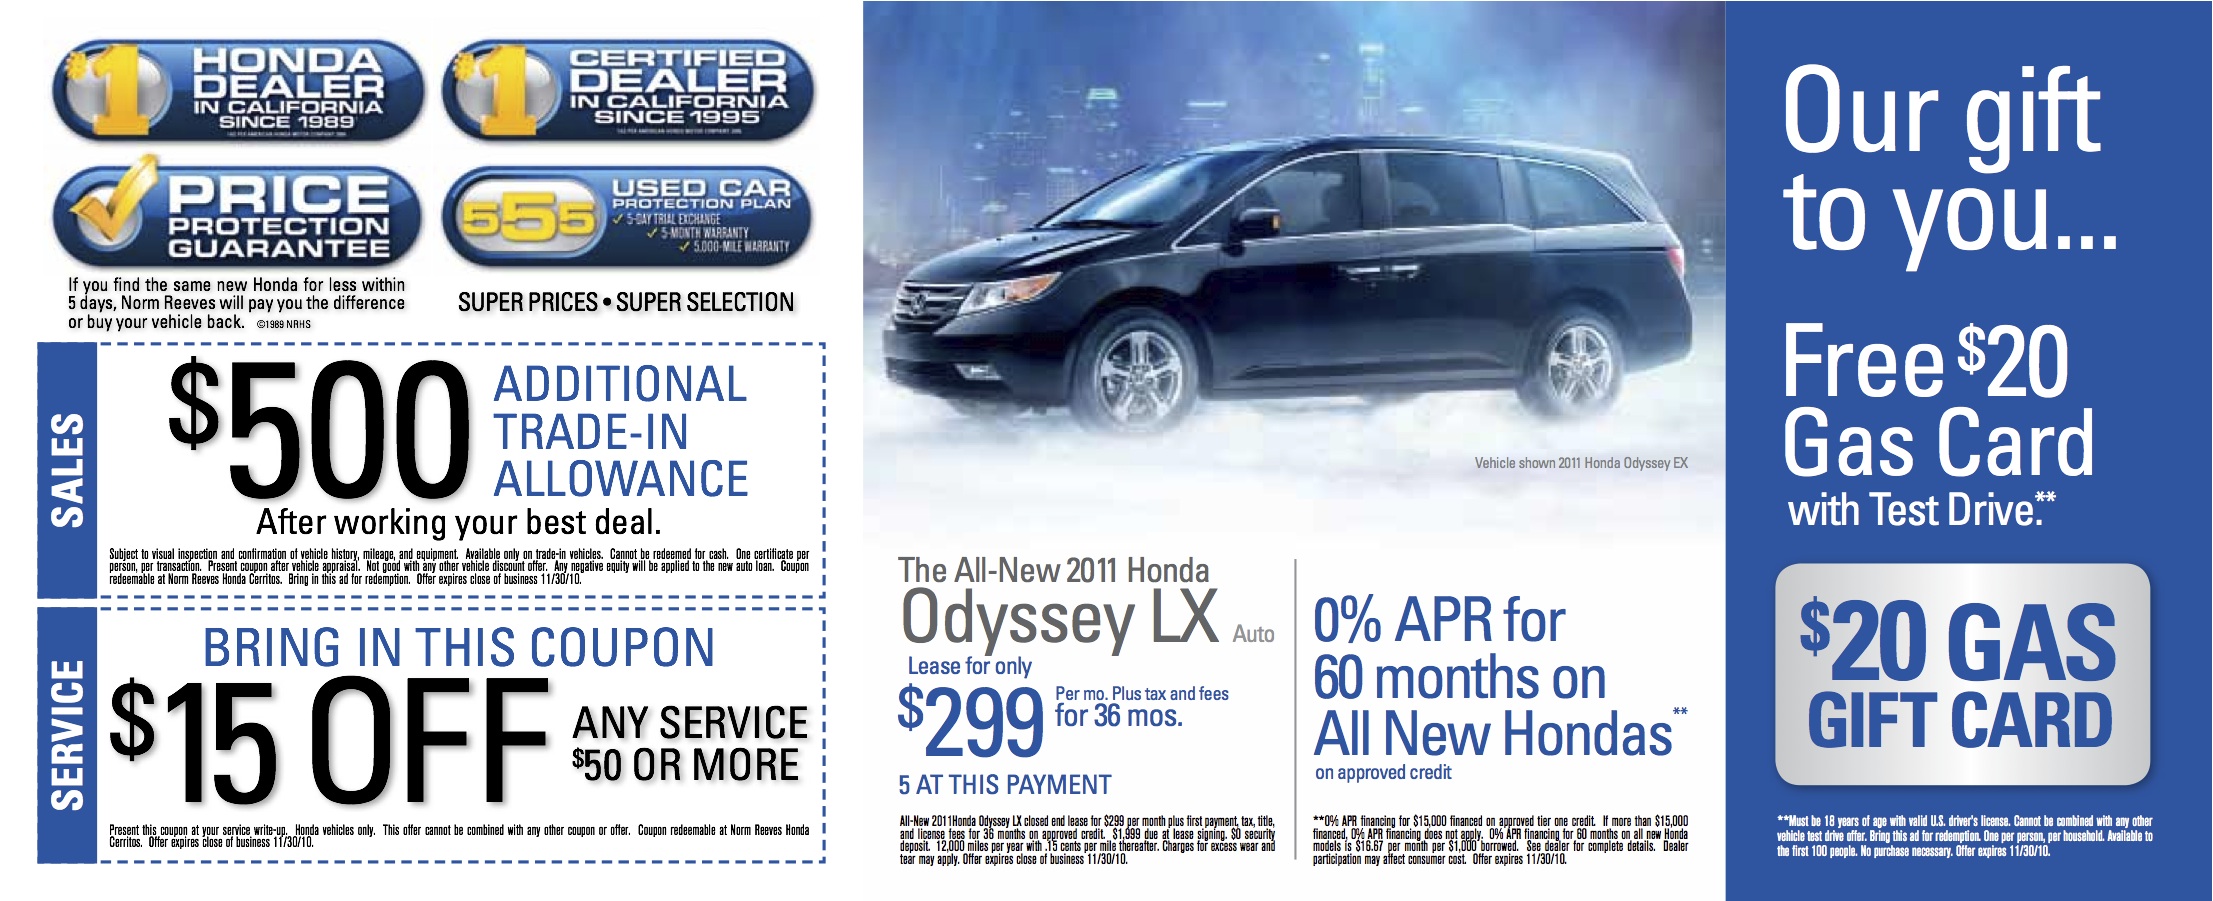 Russell smith honda oil change coupon